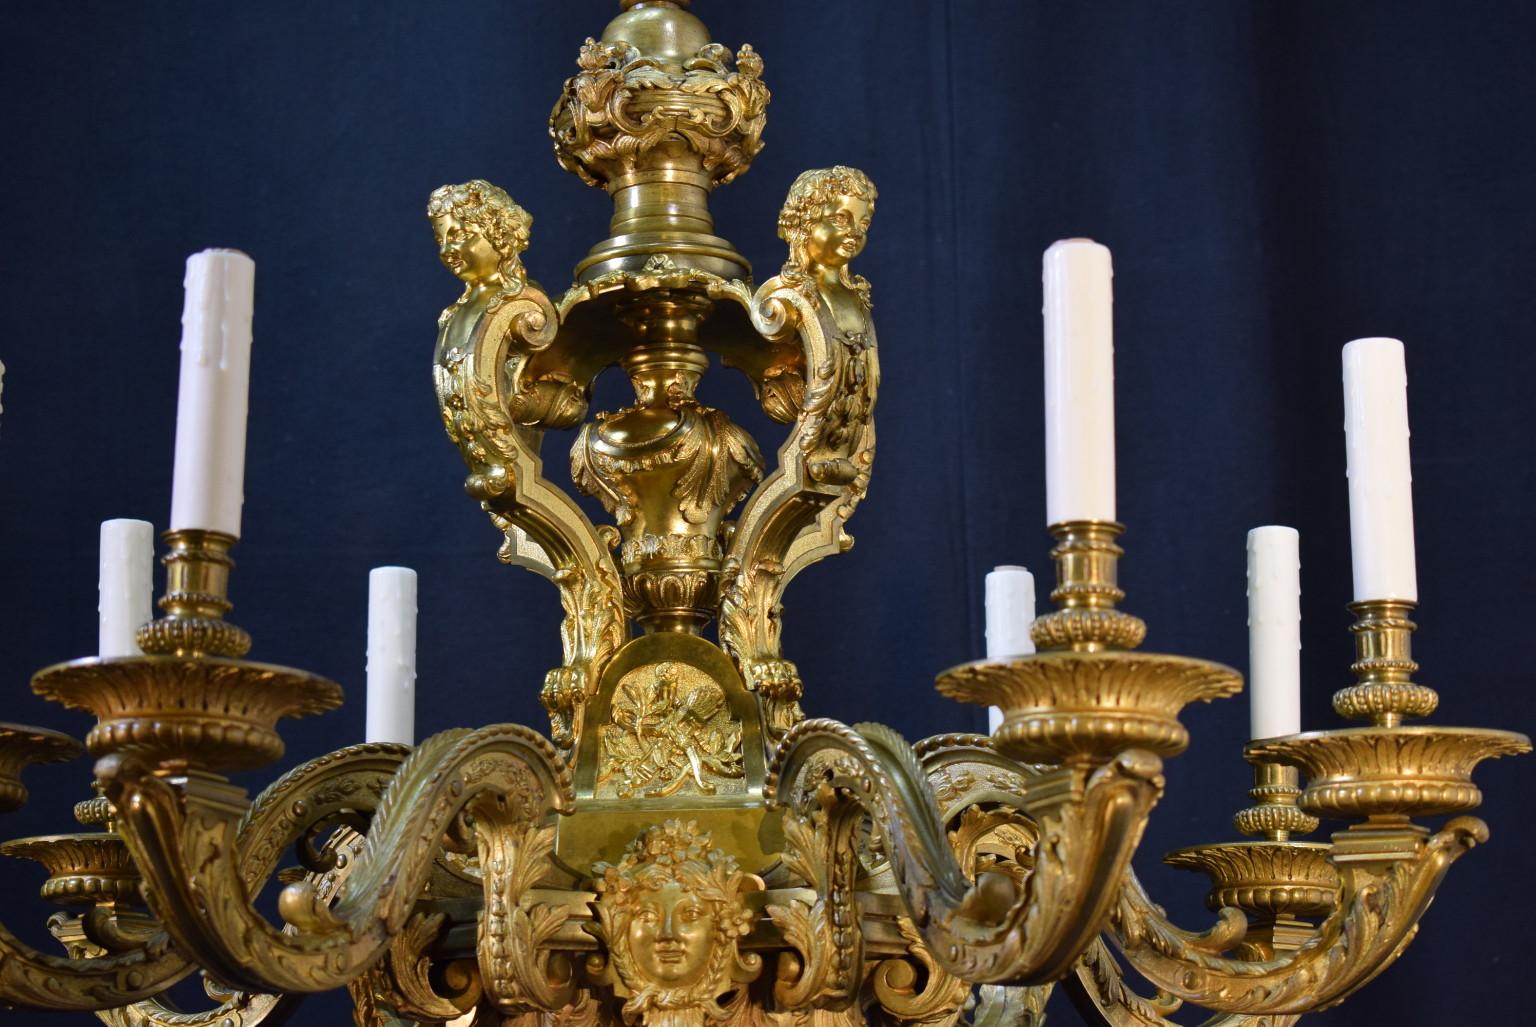 A superb Louis XIV style chandelier in gilt bronze after the model by Andre Charles Boulle, eight lights. France, circa 1900.
Dimensions: Height  36